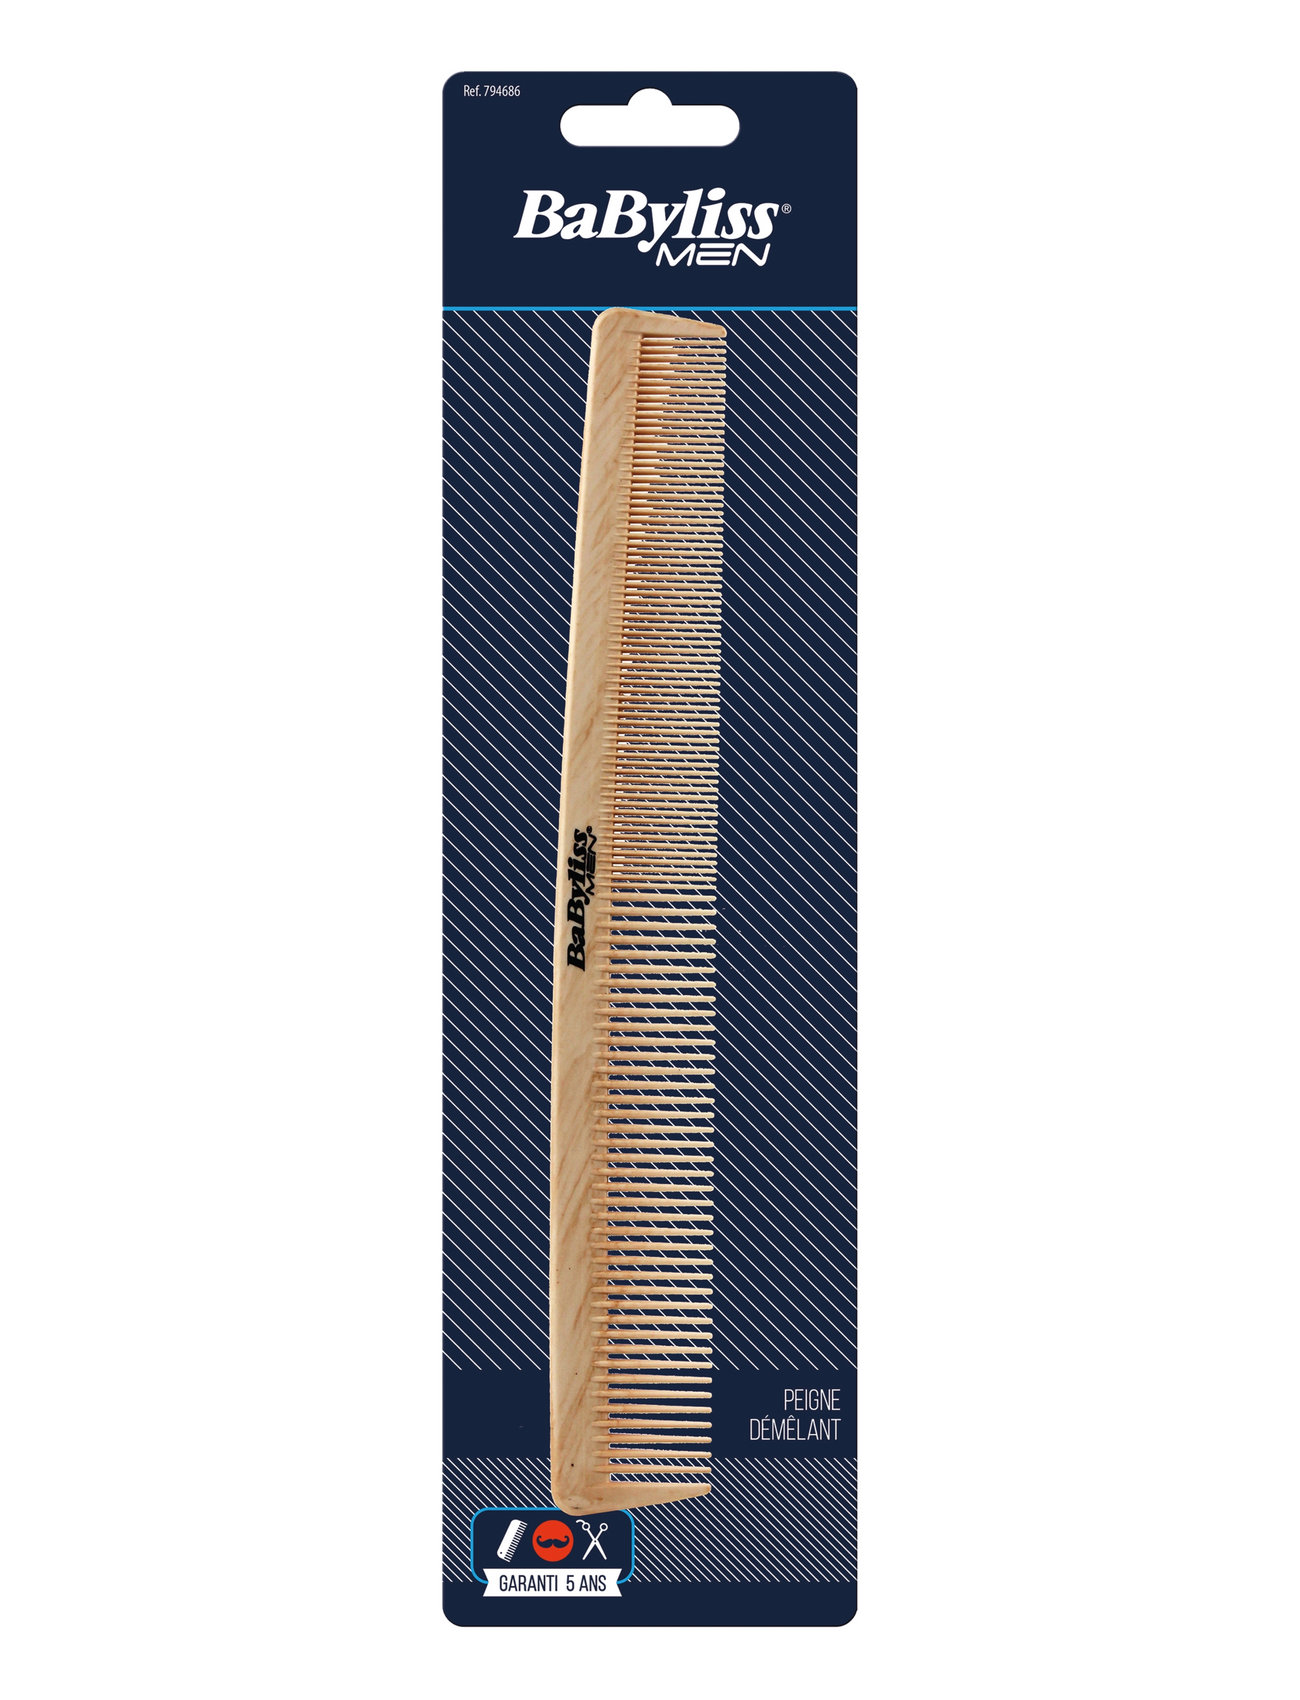 794686 Long Comb Beauty Men Hair Styling Combs And Brushes Beige Babyliss Paris